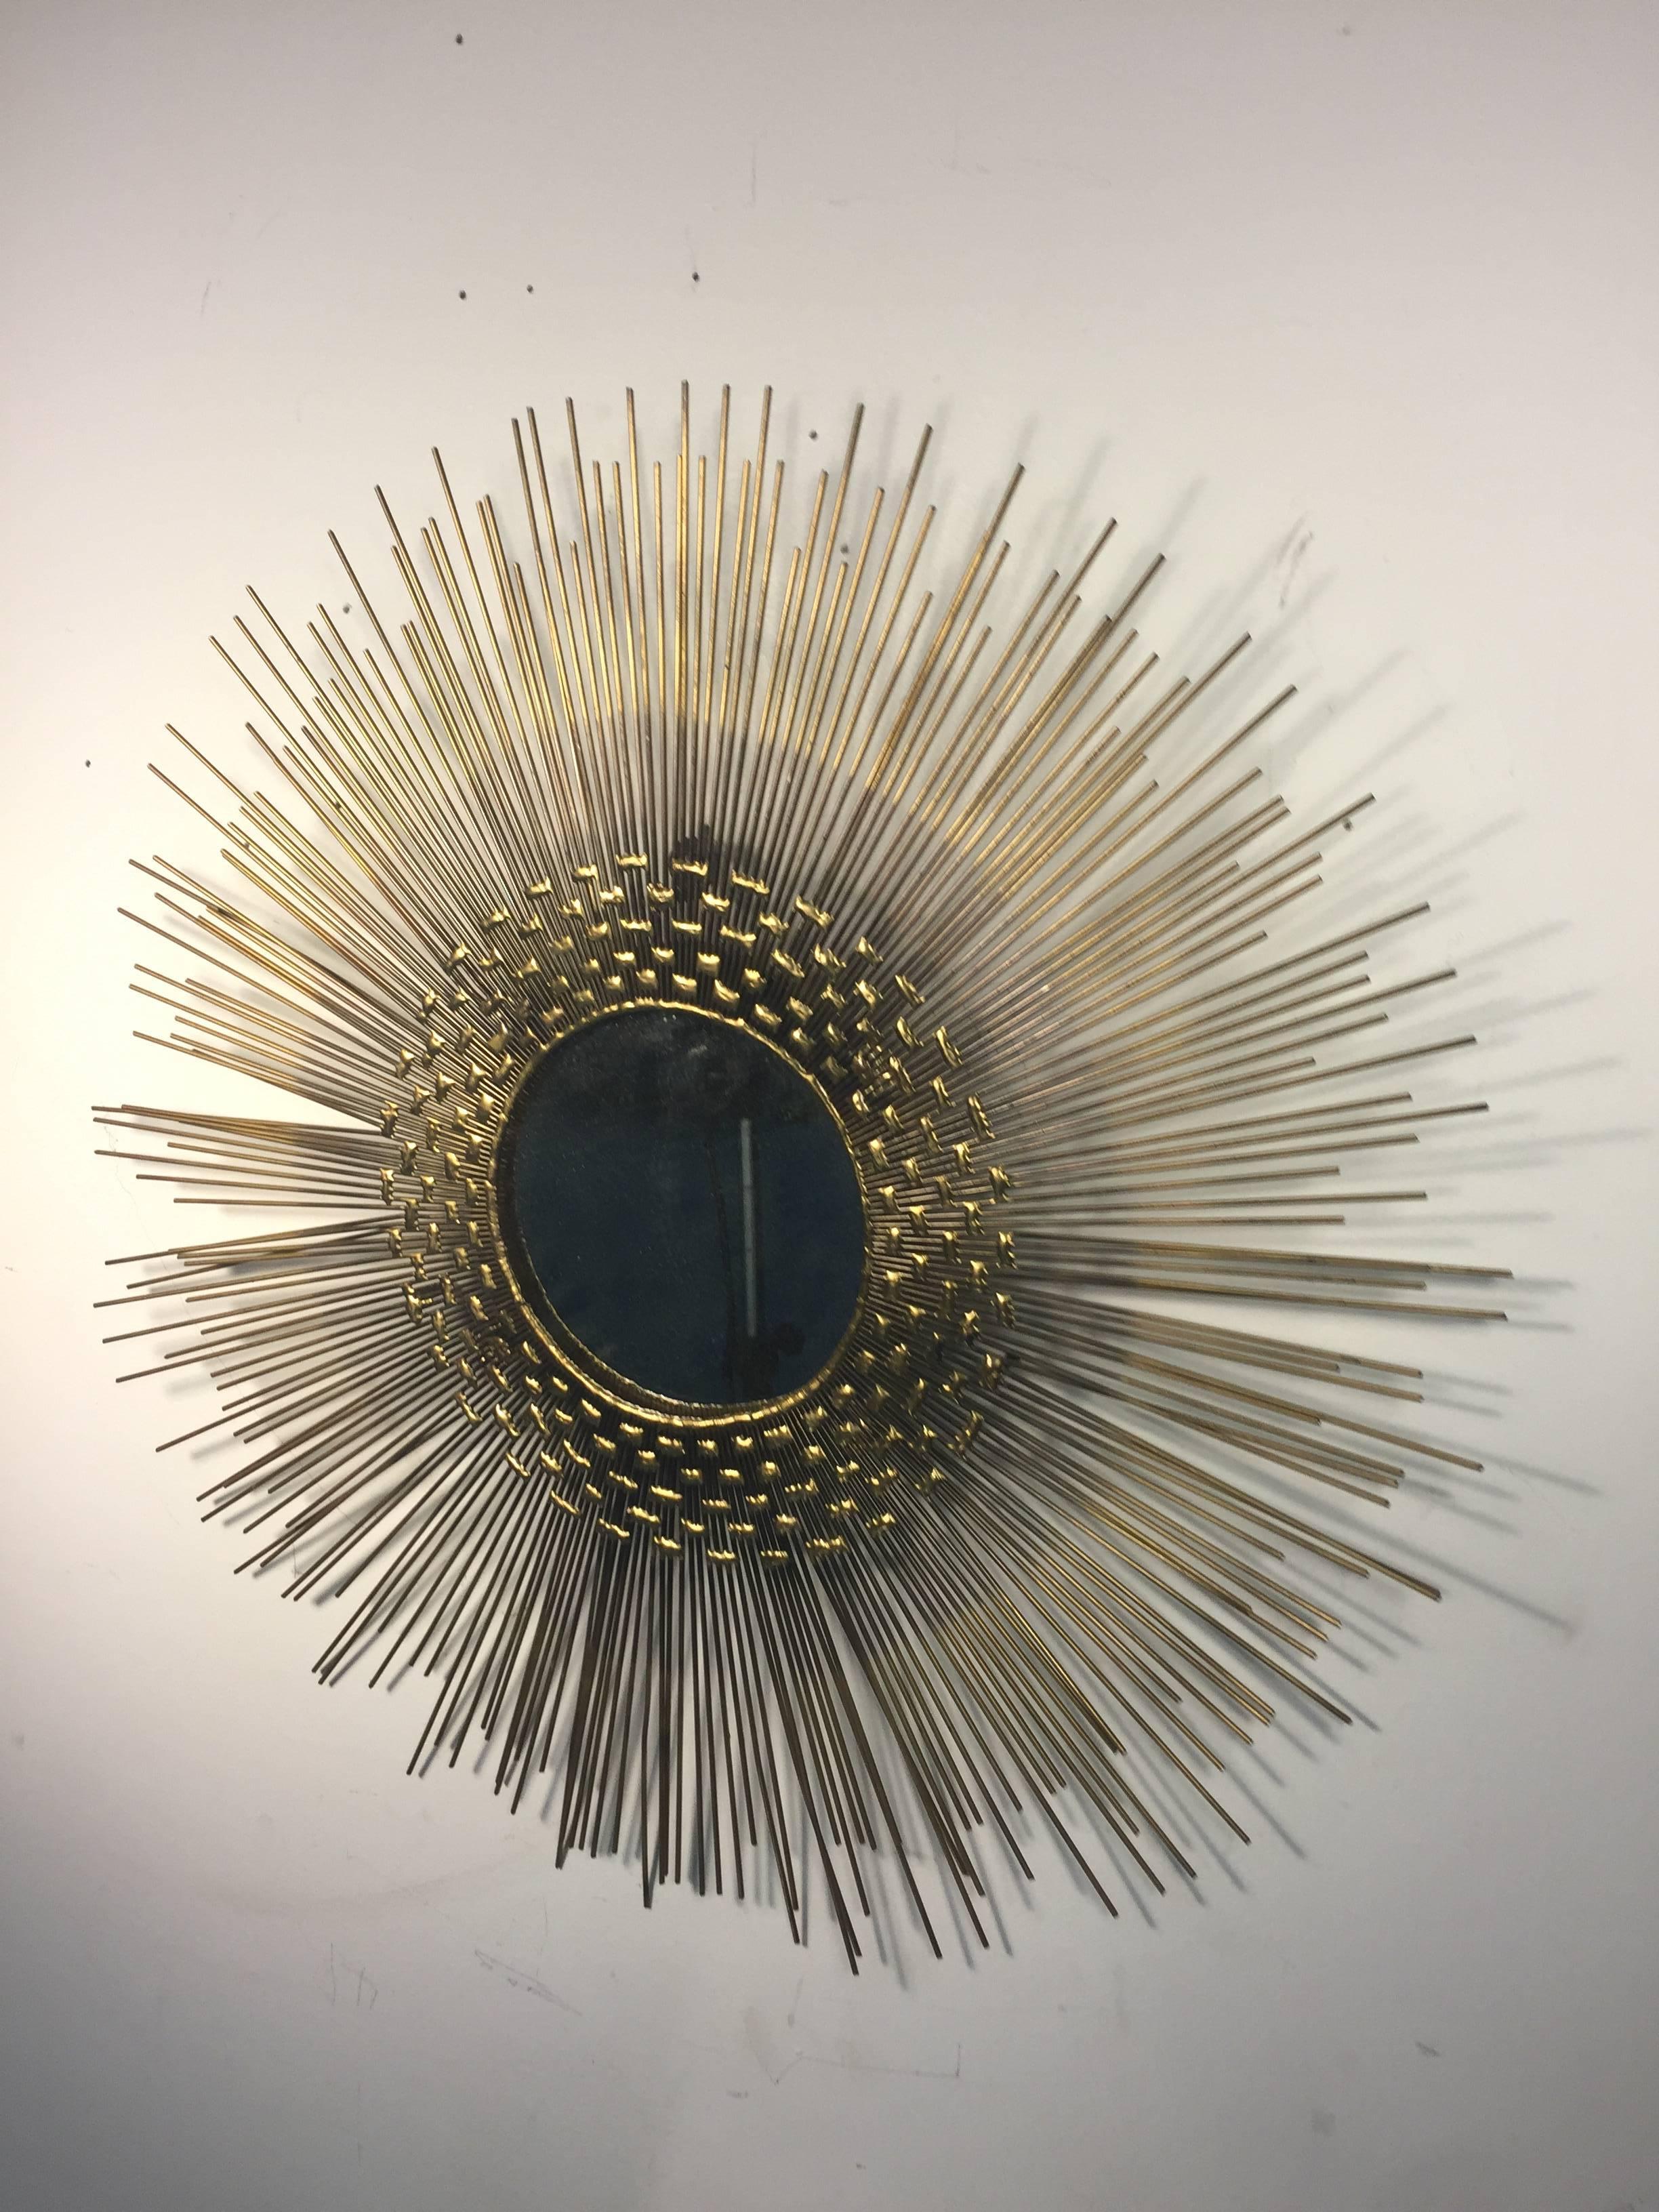 A stunning and dramatic sunburst wall-mirror by Curtis Jere with layers of thin radiating metal rods, circa 1970.